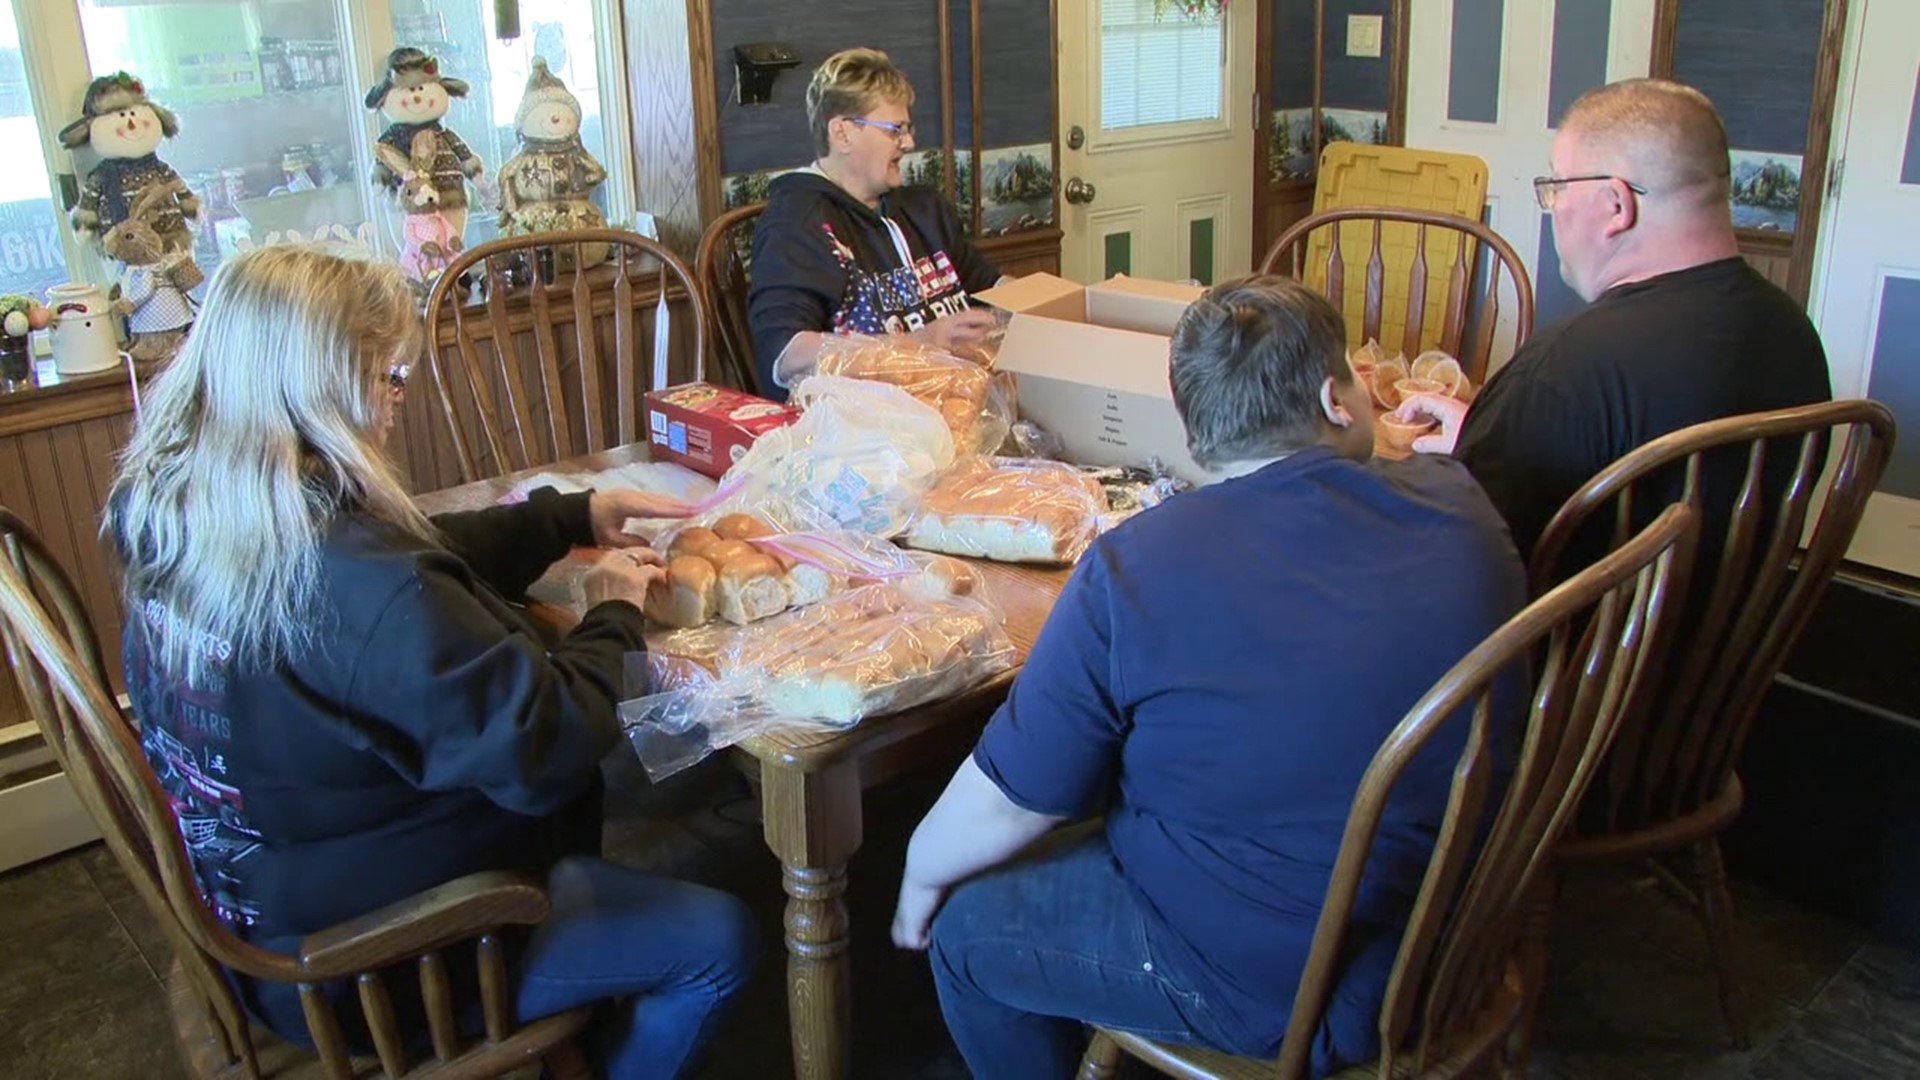 A family in Mount Pleasant Mills is paying it forward by preparing Easter meals and baskets for 500 people.